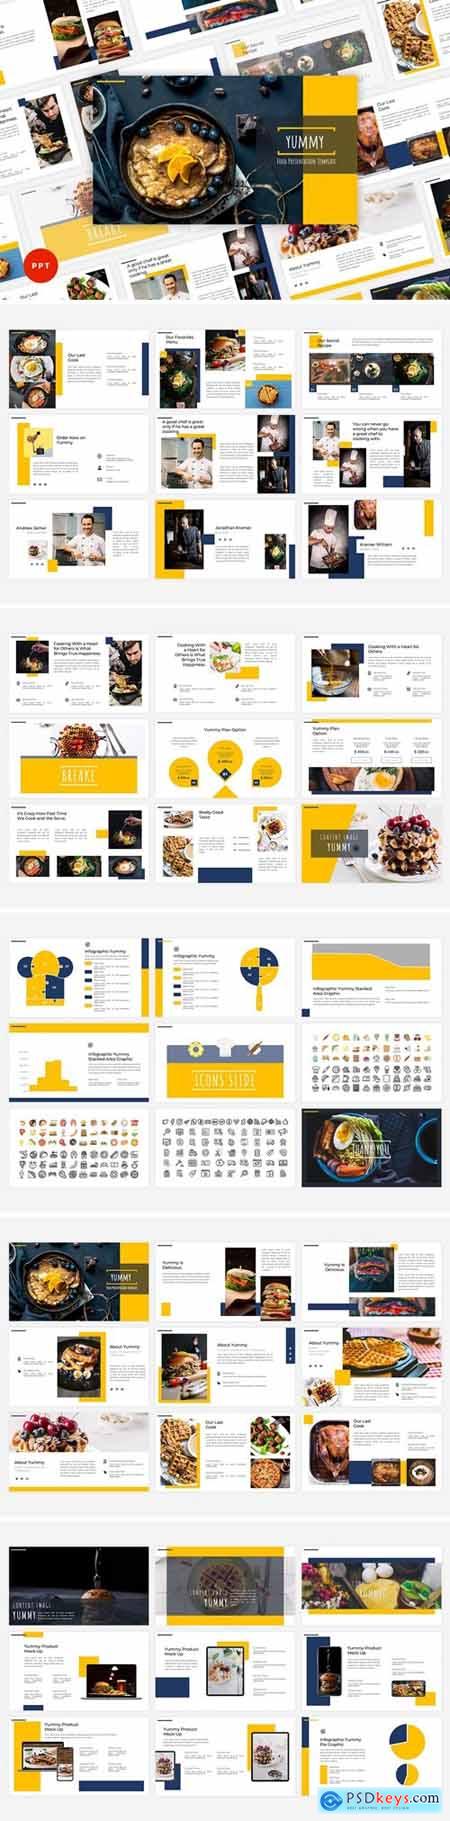 Yummy - Food Powerpoint, Keynote and Google Slides Templates